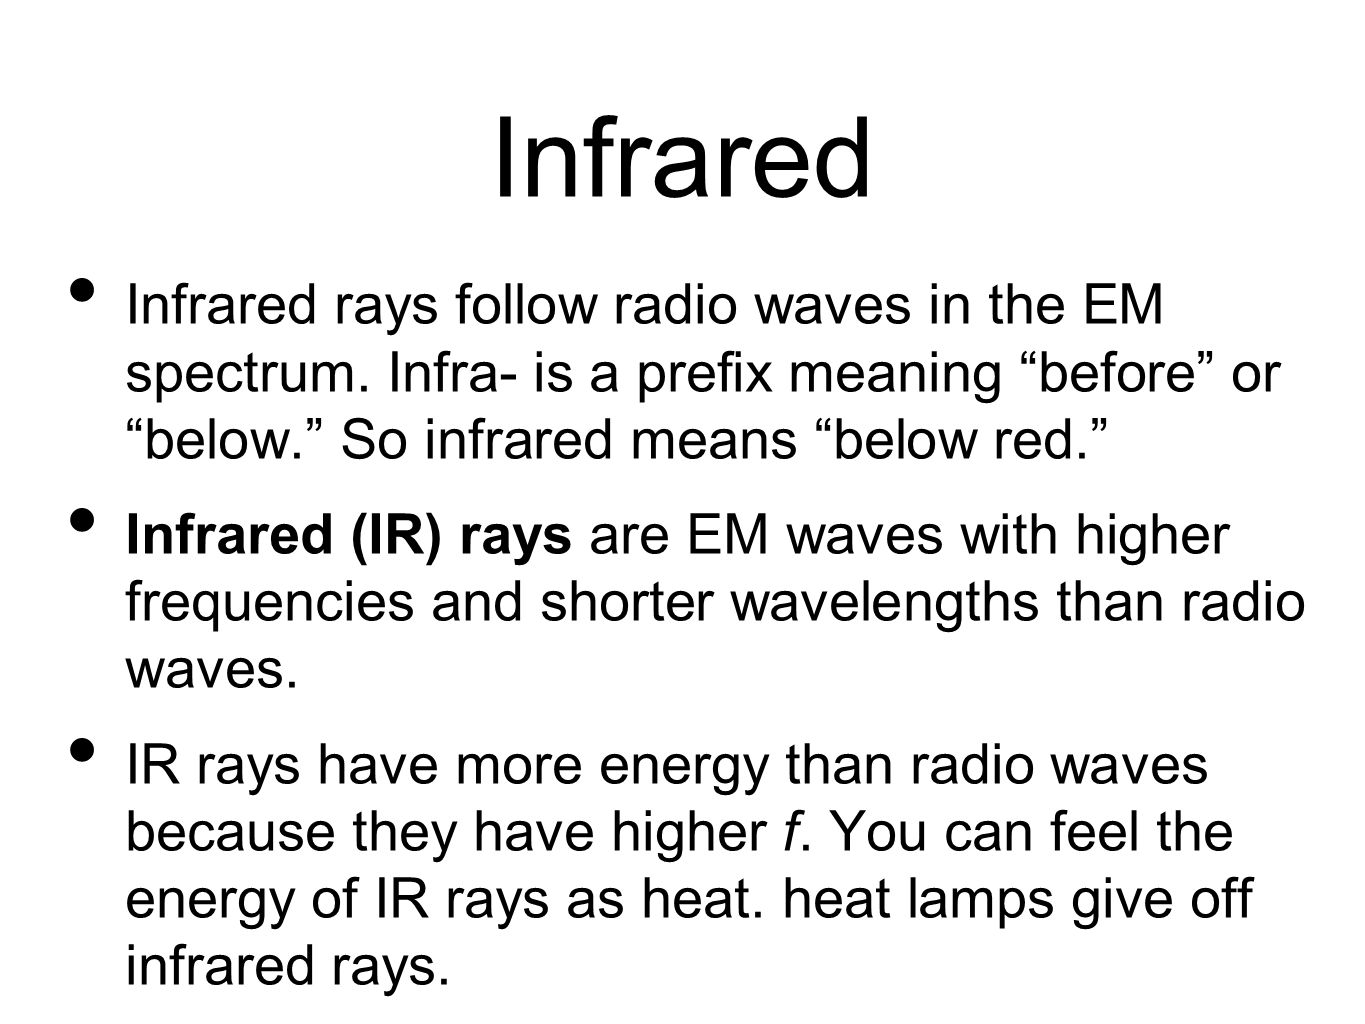 Infrared Infrared rays follow radio waves in the EM spectrum. Infra- is a prefix meaning before or below. So infrared means below red.